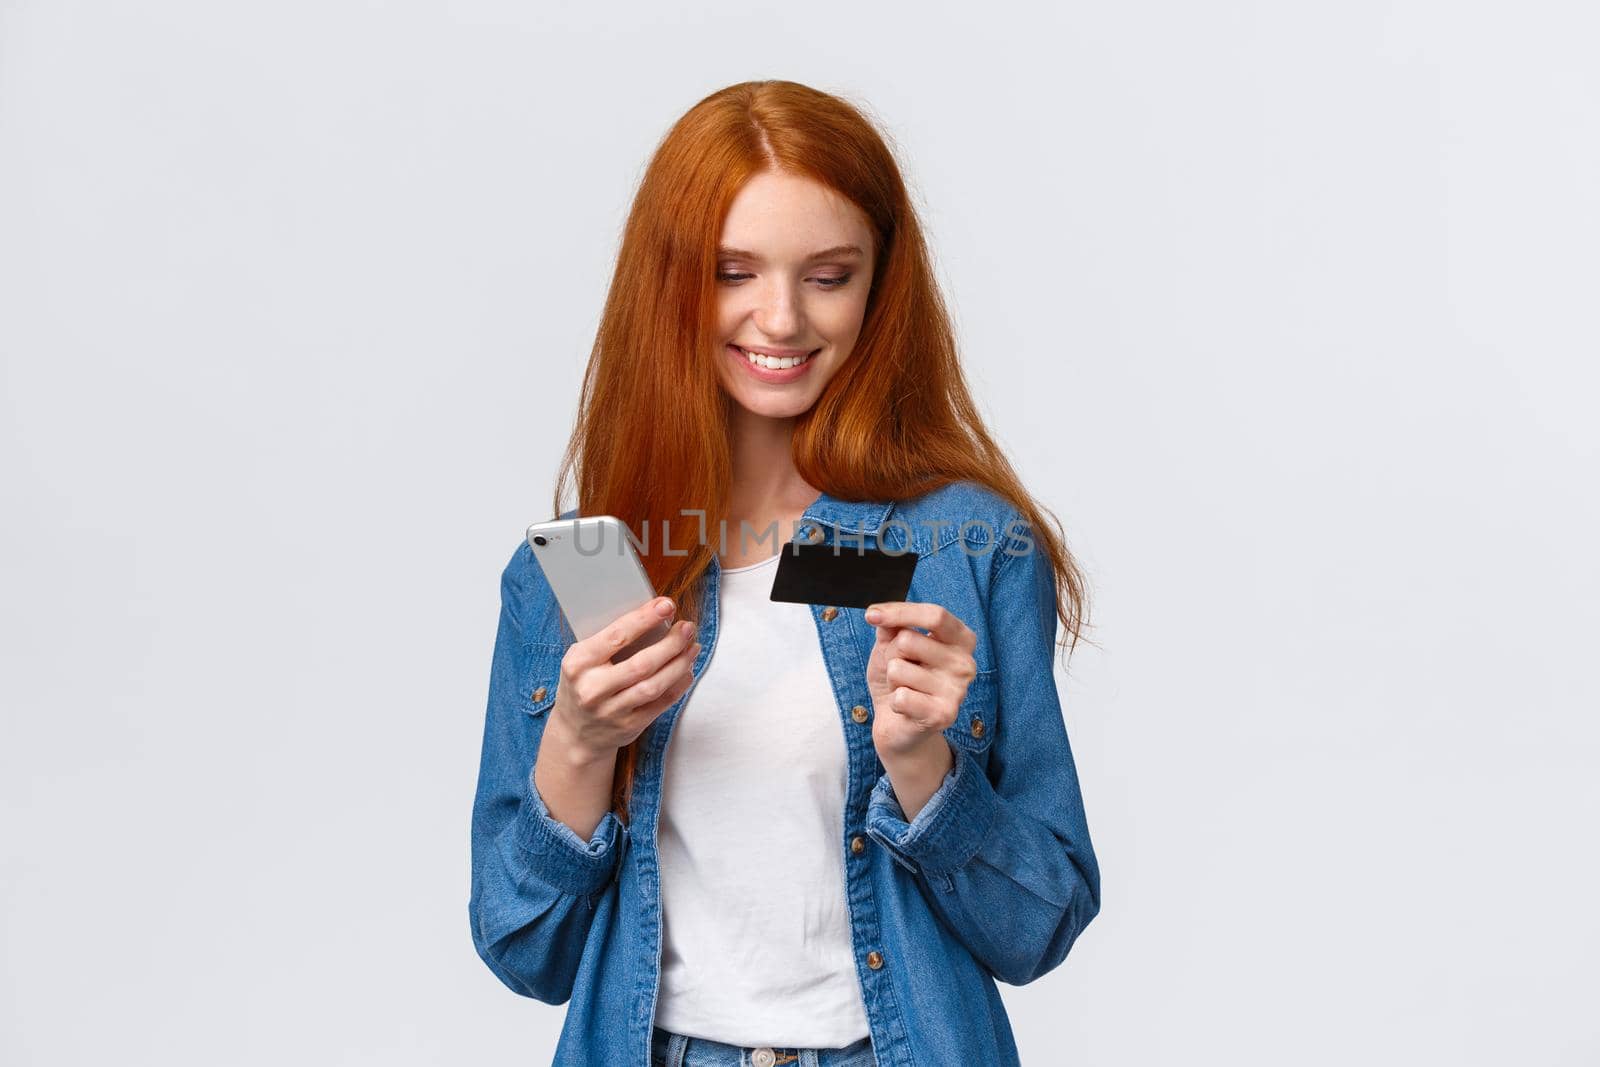 Finance, business and education concept. Cheerful cute alluring redhead woman making online purchase, holding smartphone and credit card, smiling as buying present for valentines day internet store.